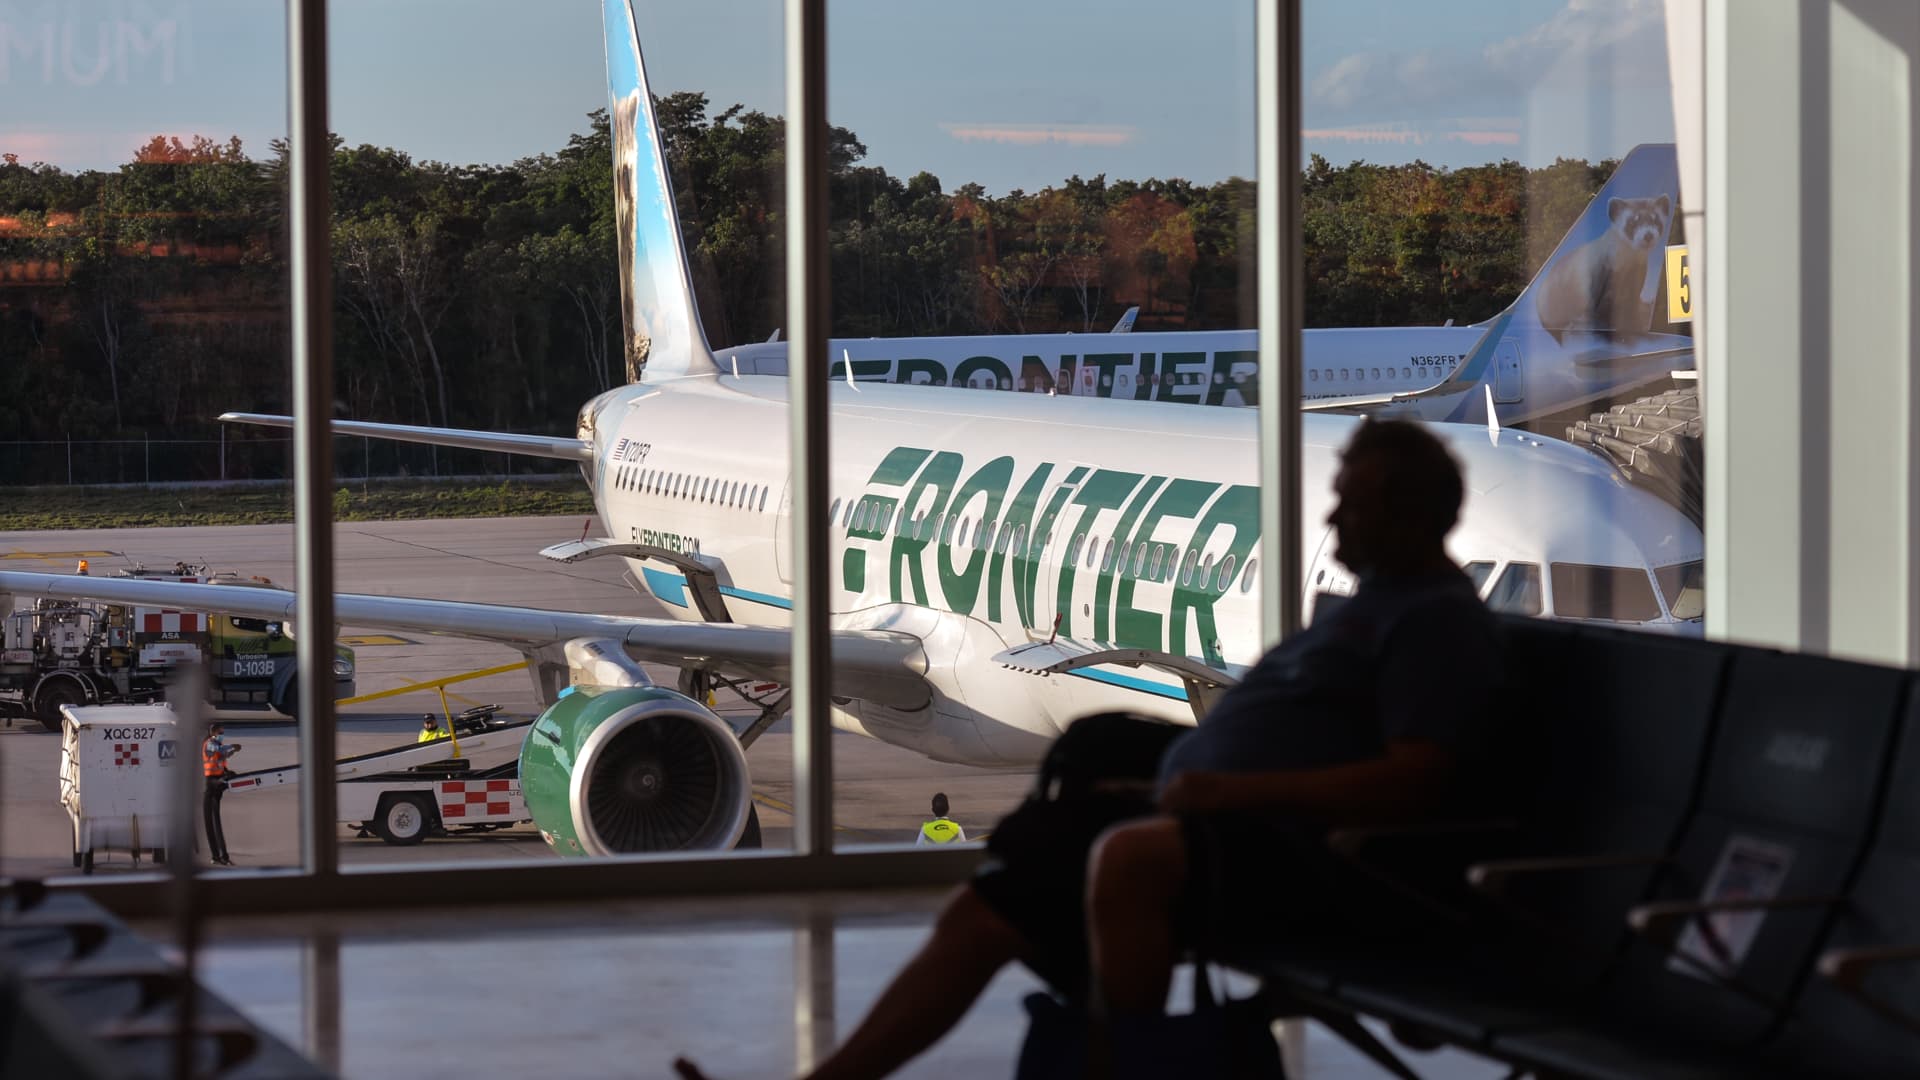 Frontier Airlines CEO says passengers abuse airport wheelchair service